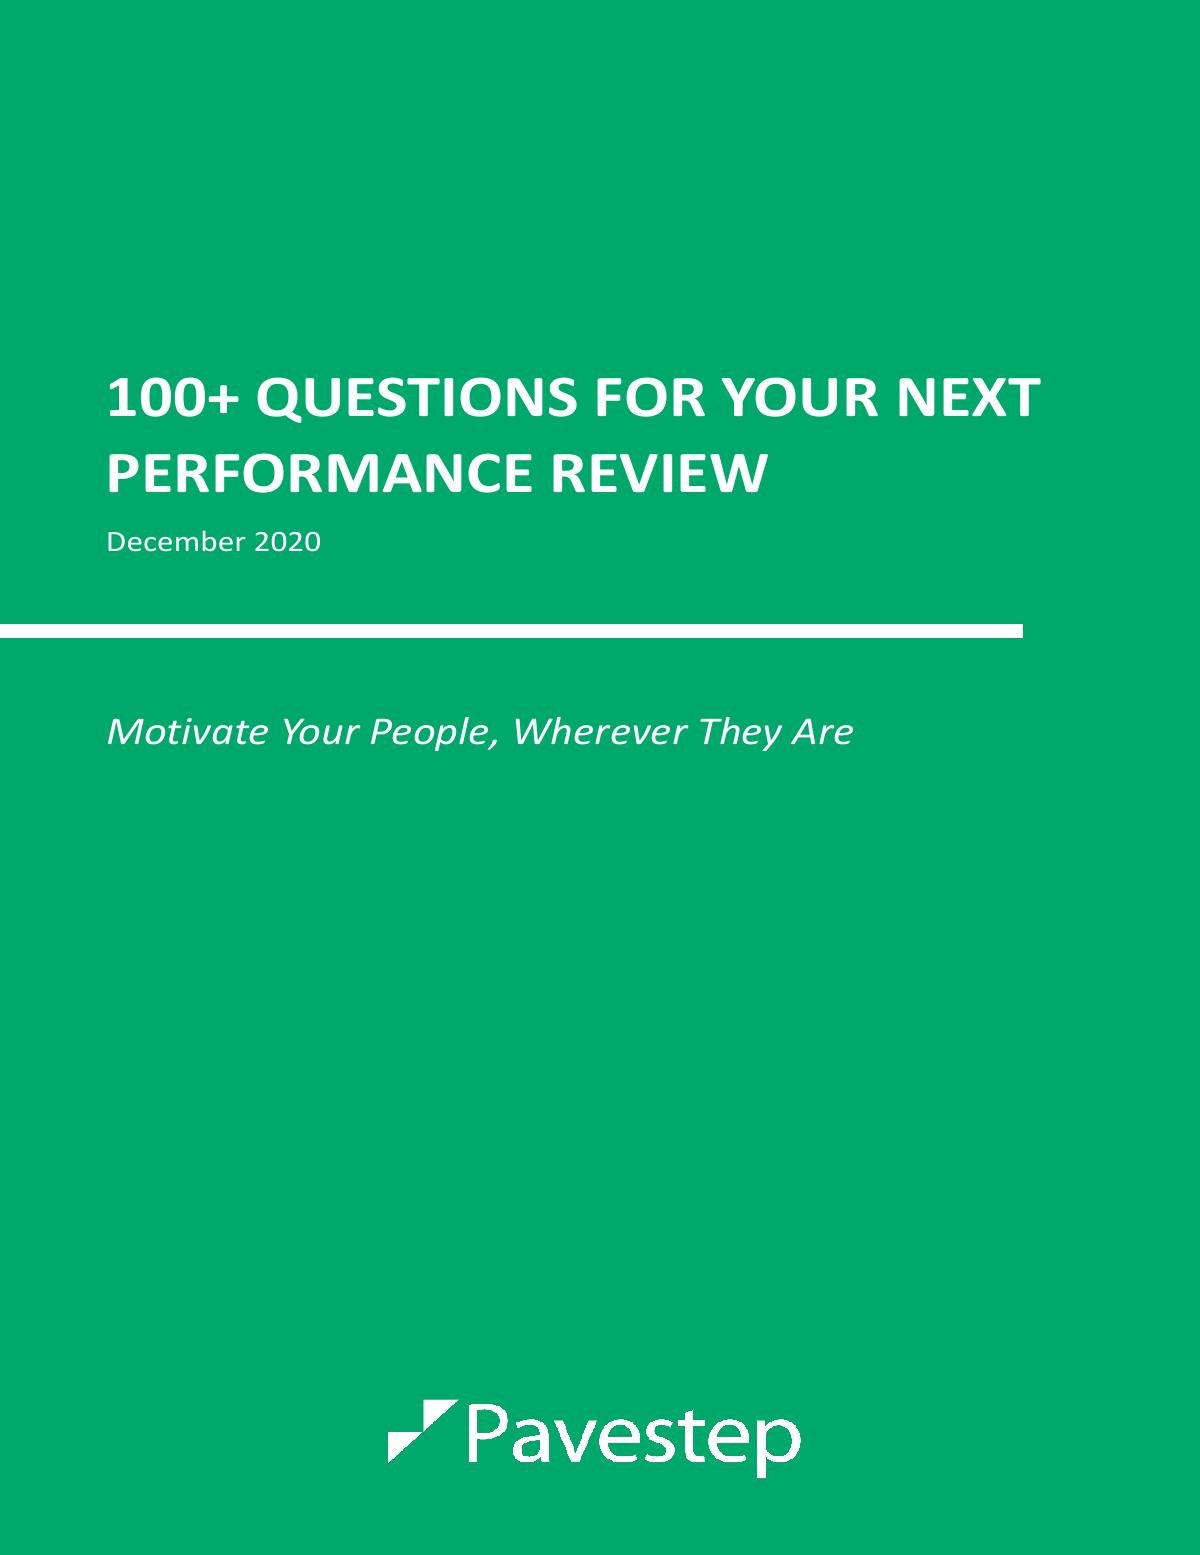 100+ Questions to Ask in Your Next Performance Review